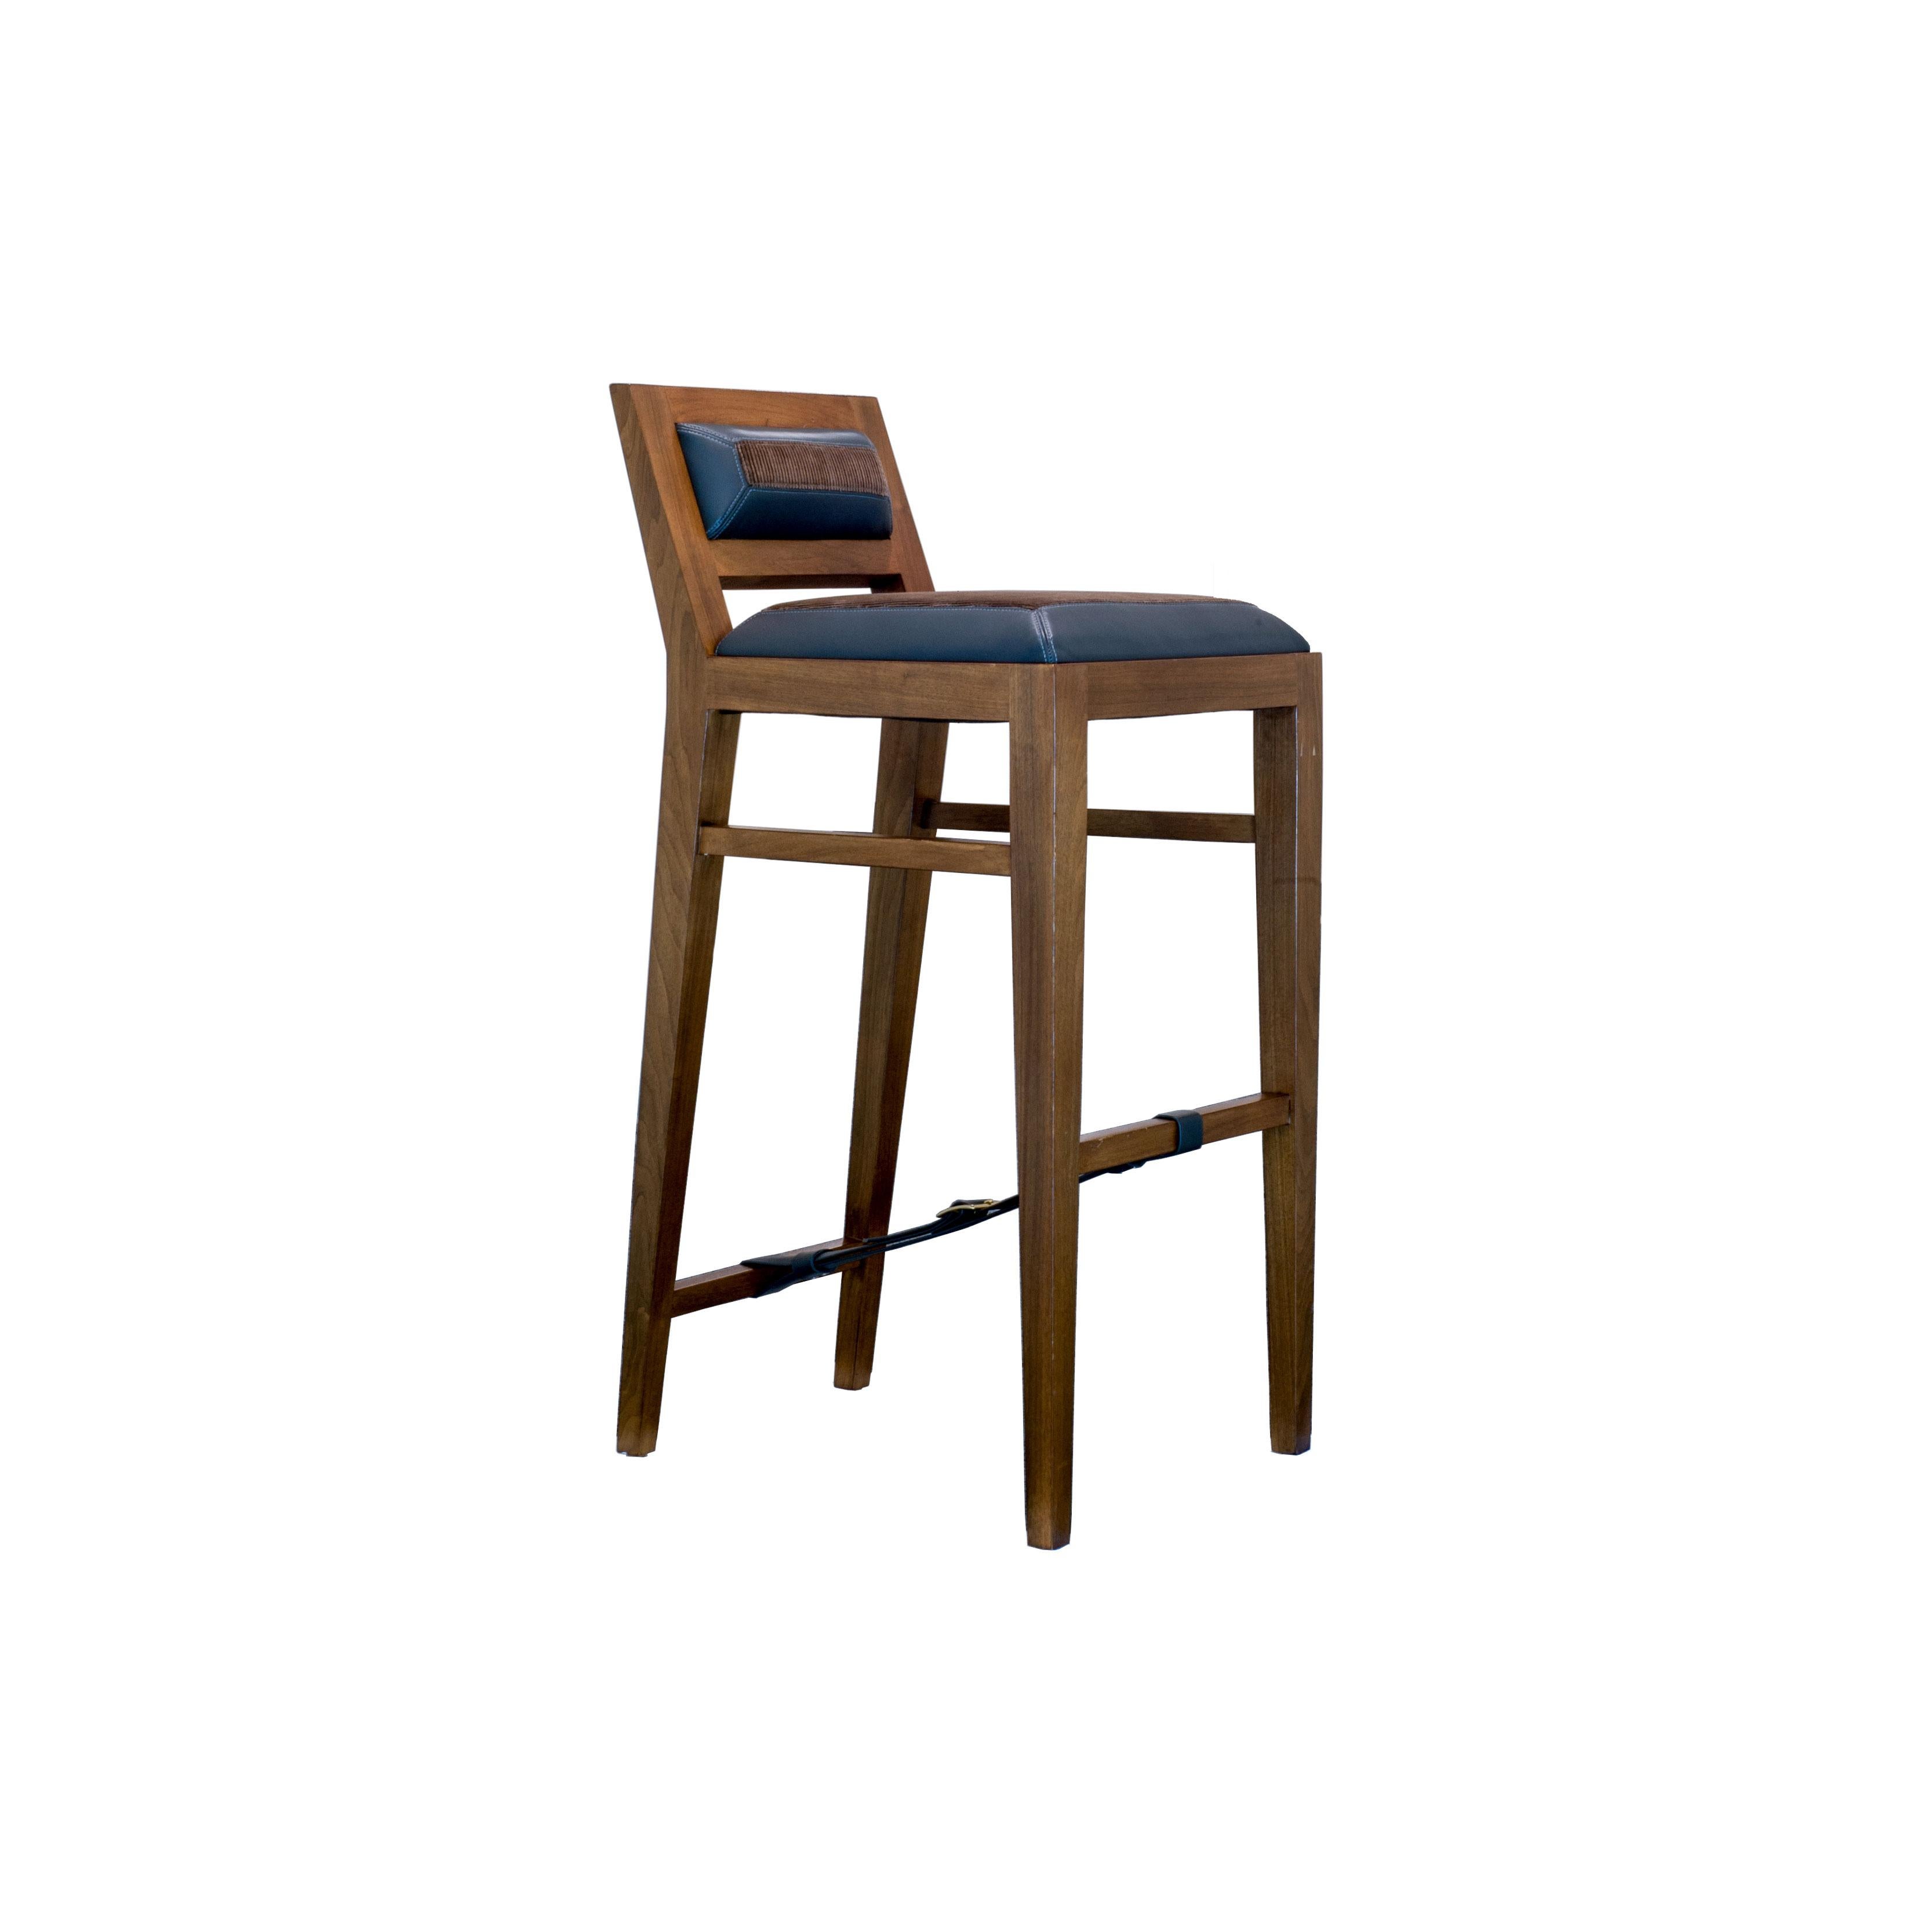 The solid walnut bar stool is hand-crafted with traditional joinery. The upholstery features a combination of leather and fabric and is an homage to 1940's French designer Jacques Adnet. Custom sizes and finishes available.